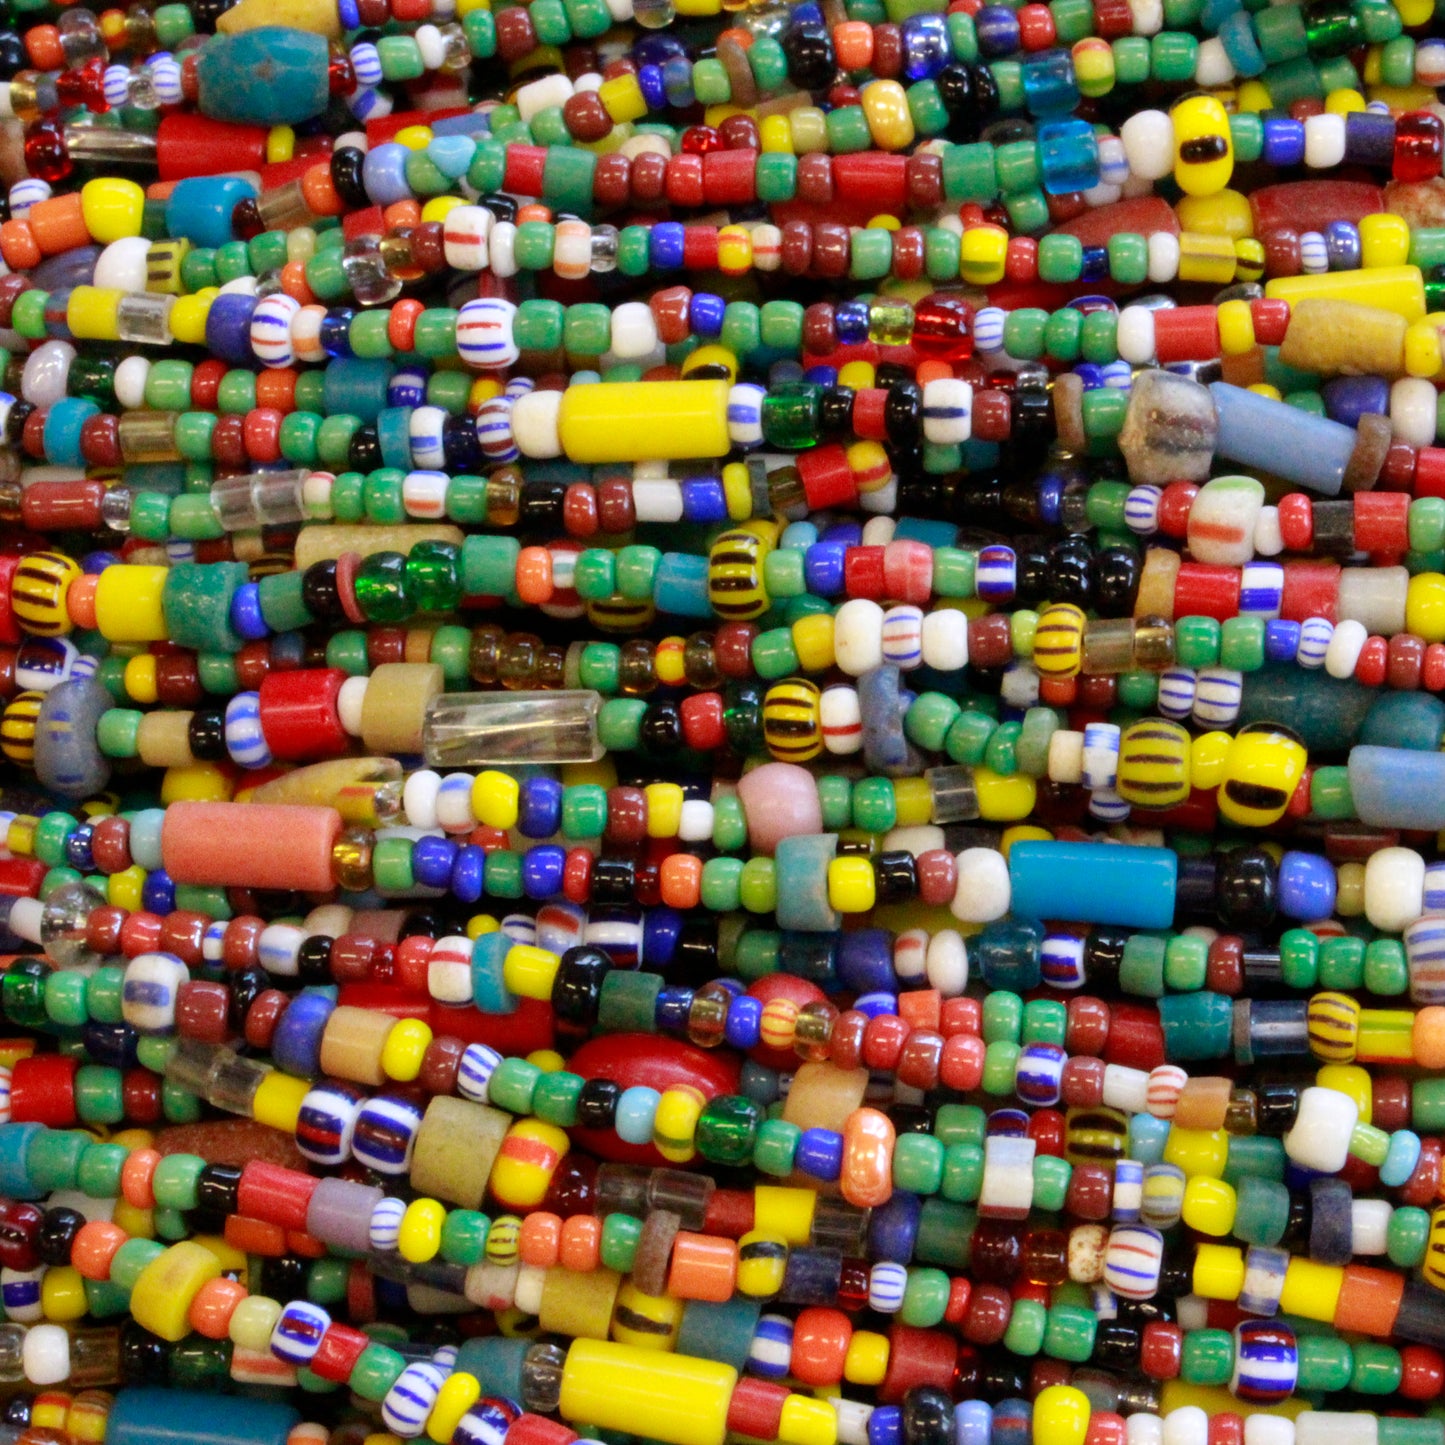 African Seed Beads  - Mixed Colors - 36 Inch Strand